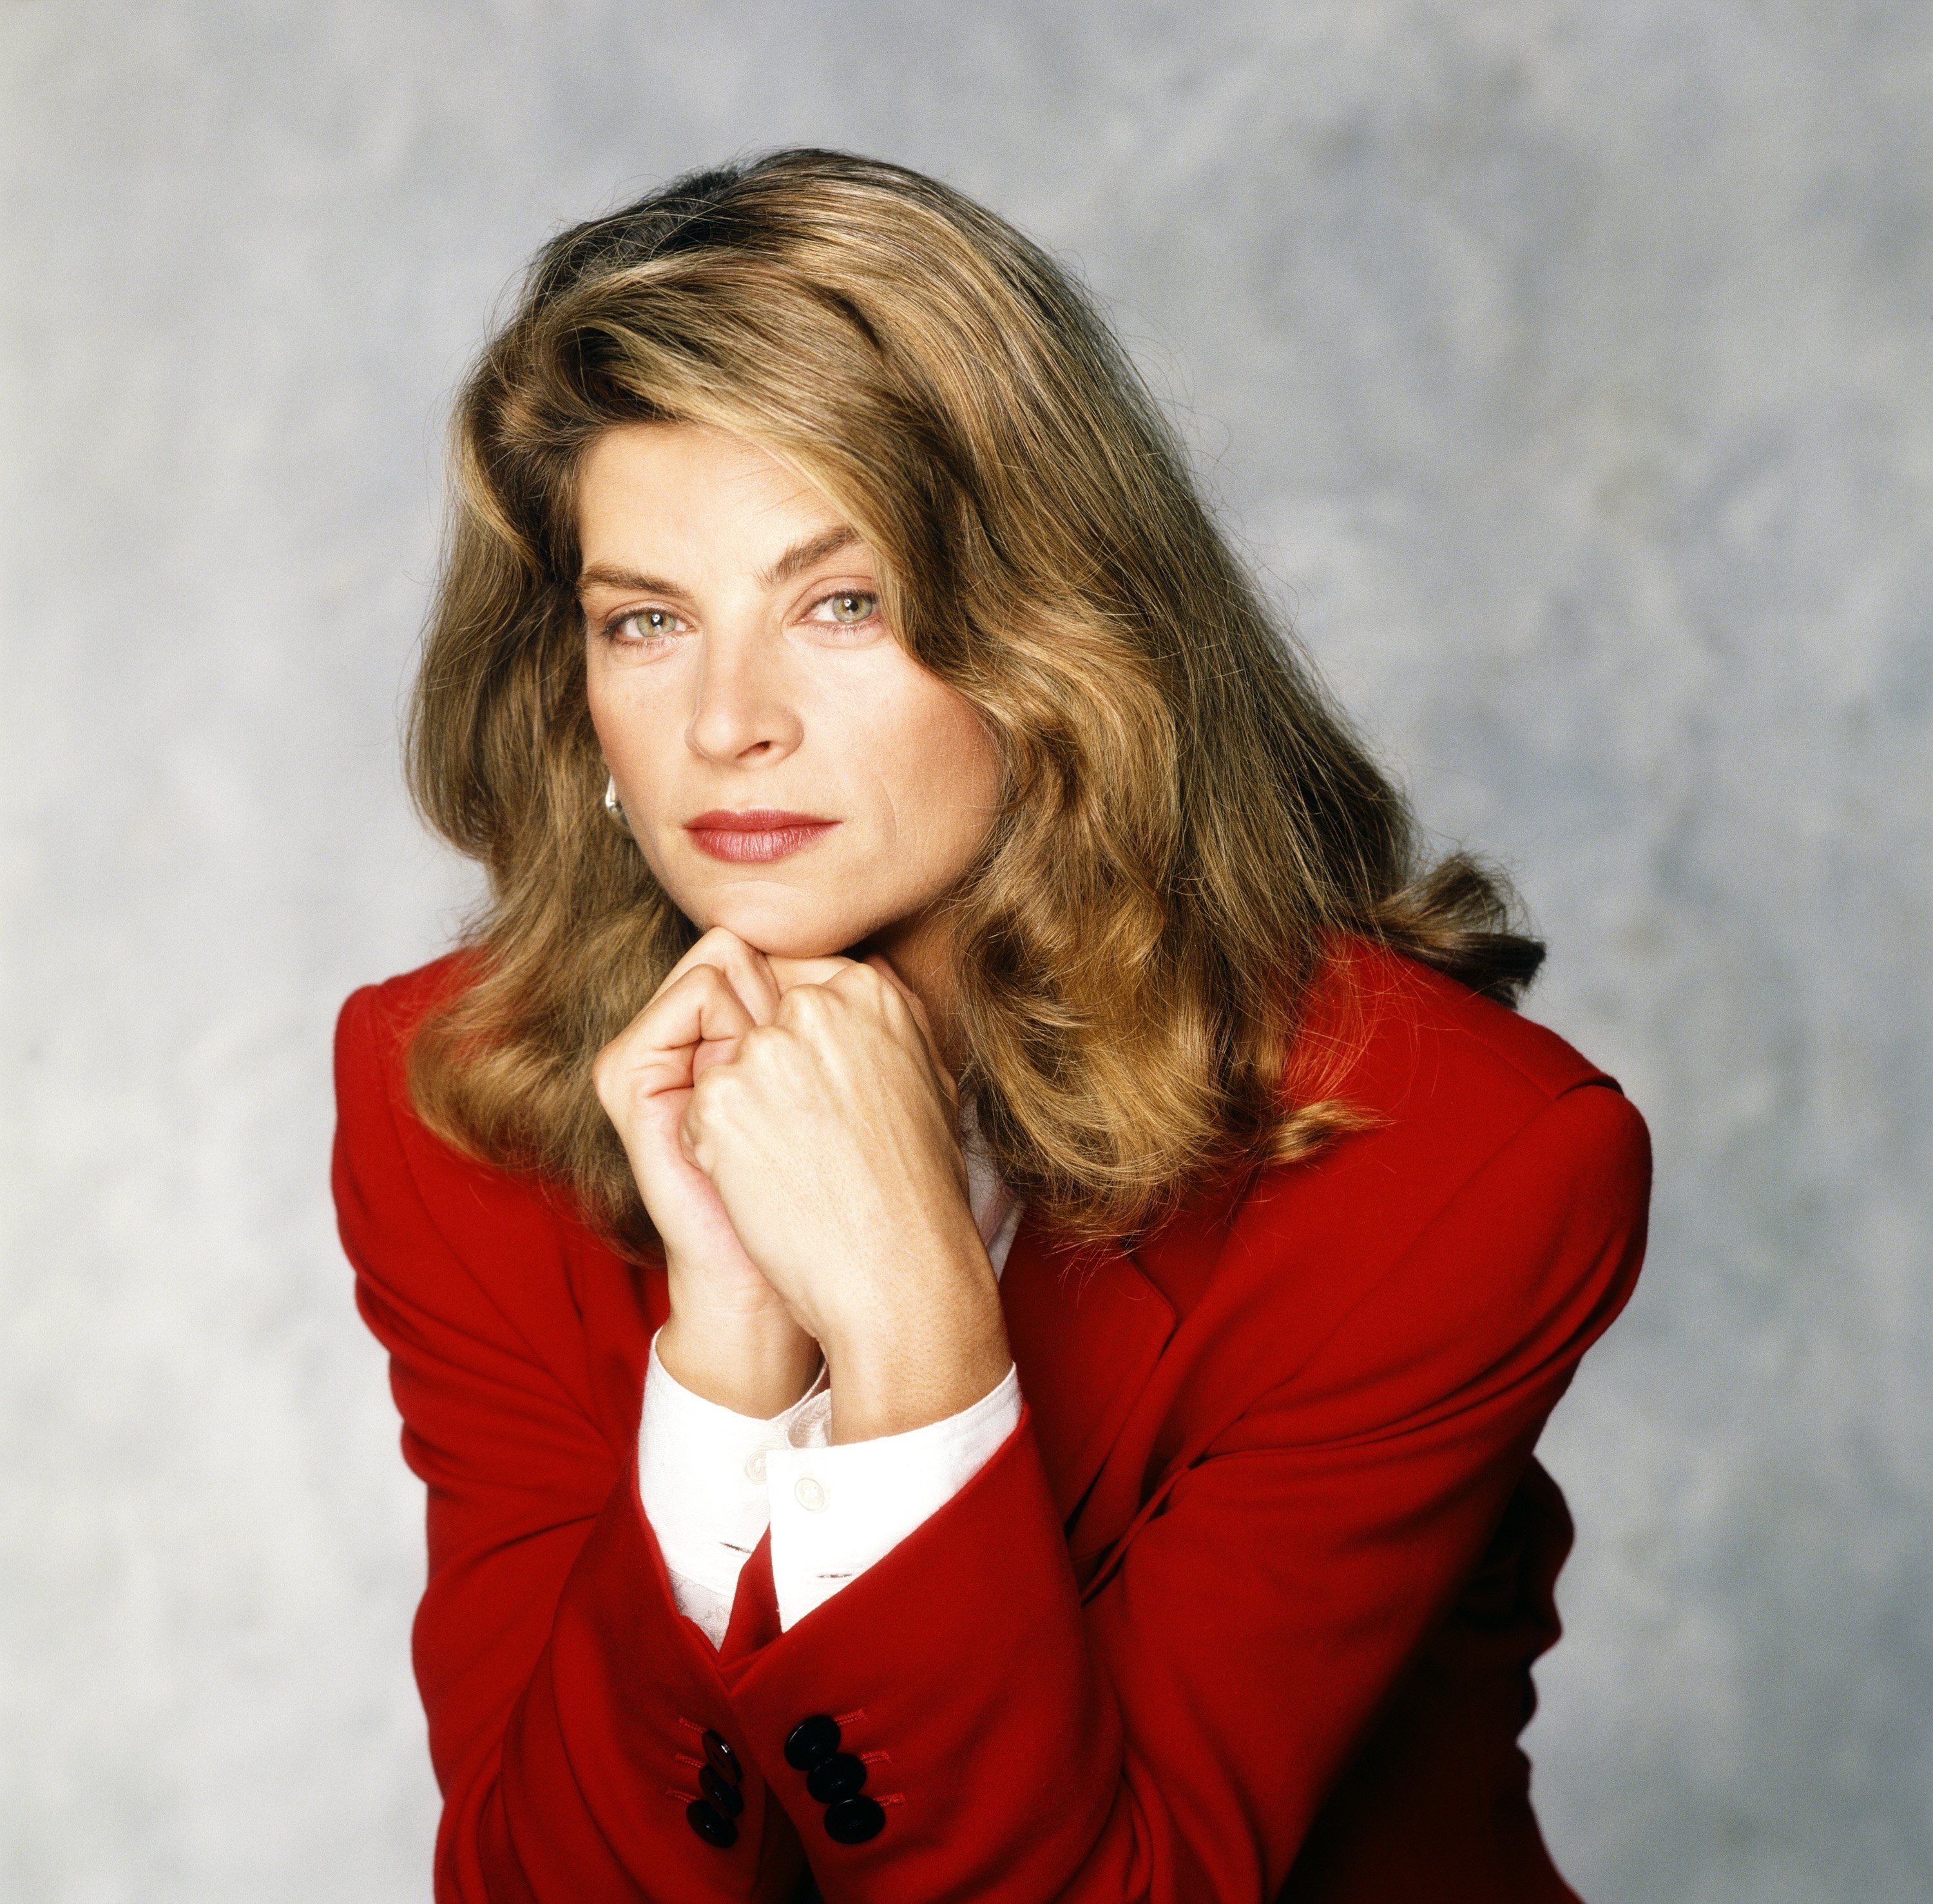 Kirstie Alley als Rebecca Howe in "Cheers". | Quelle: Getty Images